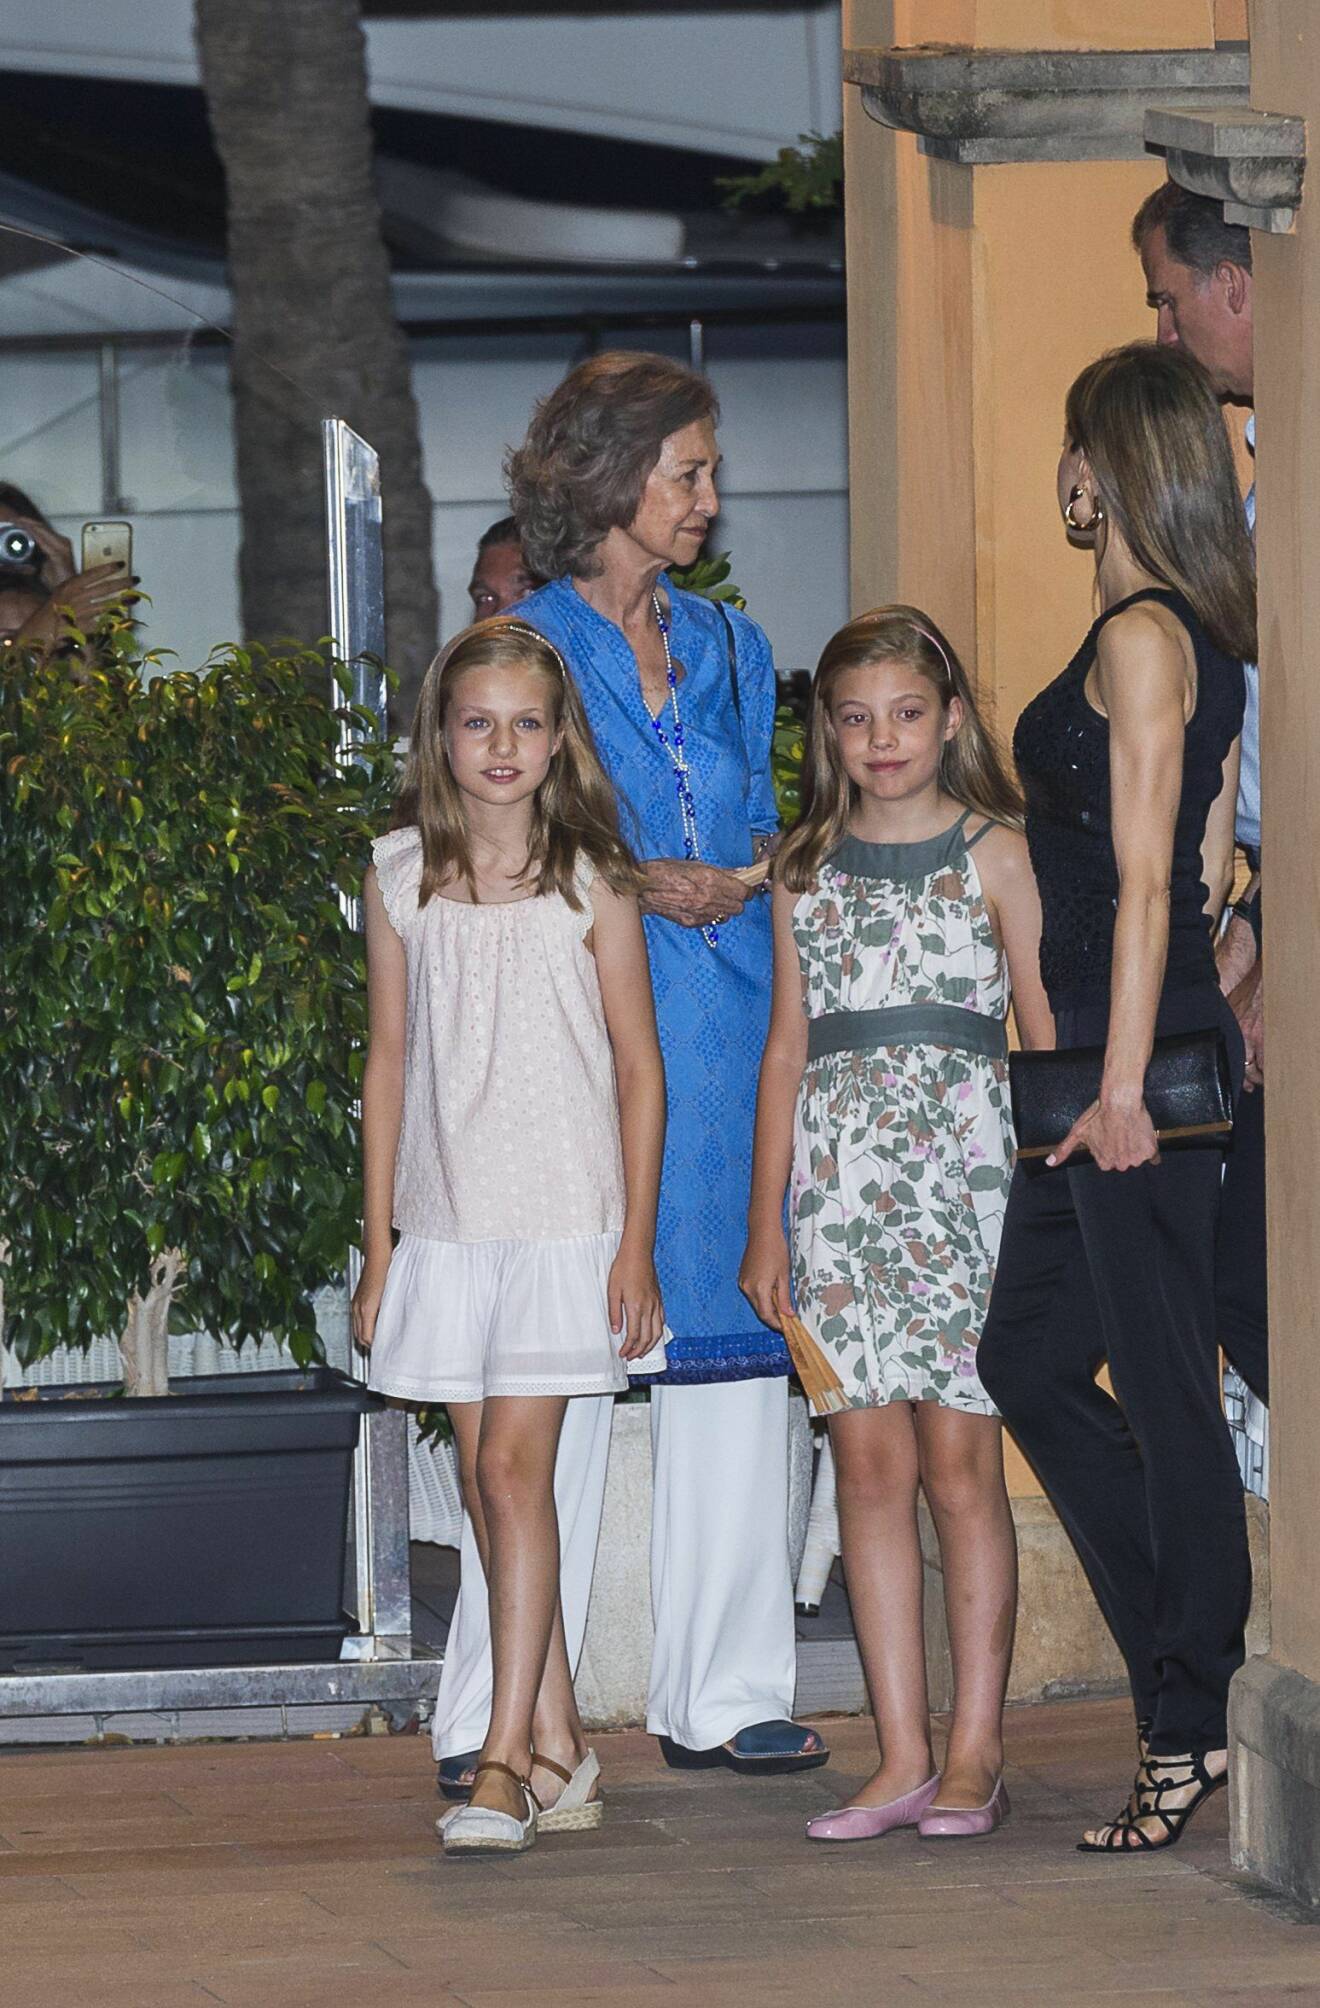 King Juan Carlos, Queen Sofia, King Felipe, Queen Letizia, Princess Leonor, Princess Sofia, Princess Elena, Princess Victoria Federica and Prince Juan Froilan leave the Flanigan Maserati Restaurant after a family dinner in Portals Nous, Mallorca, Spain, July 31, 2016. Photo by Almagro/ABACAPRESS.COM (c) Abaca / IBL